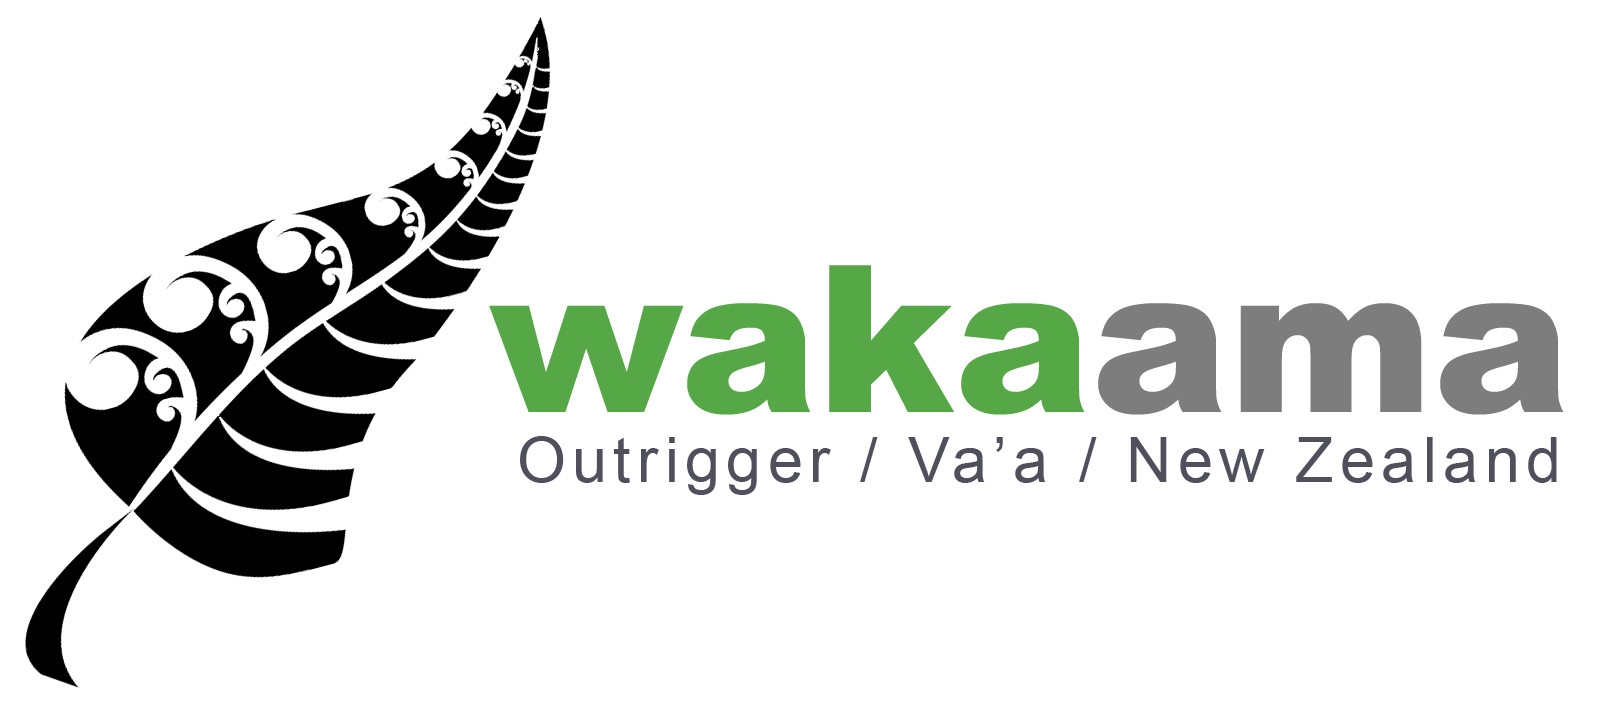 EXTENDED: Waka Ama New Zealand Appointed Board Member Applications extended till Friday 6th December